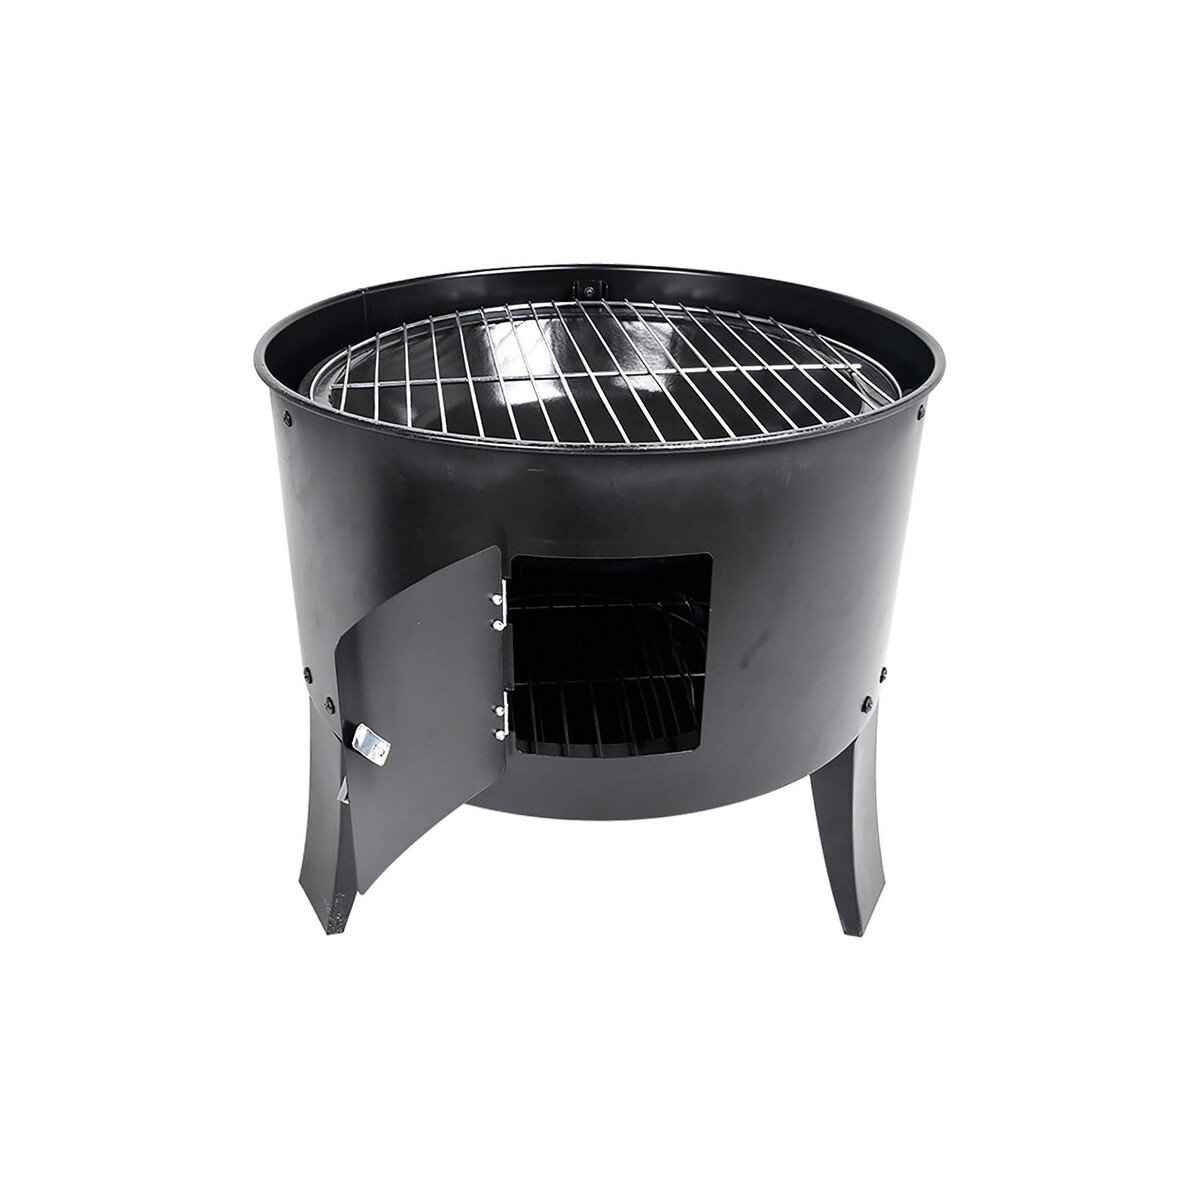 Relax Pellet Barbecue Smoker Grill With Chimmy YH8540B 35.59cm